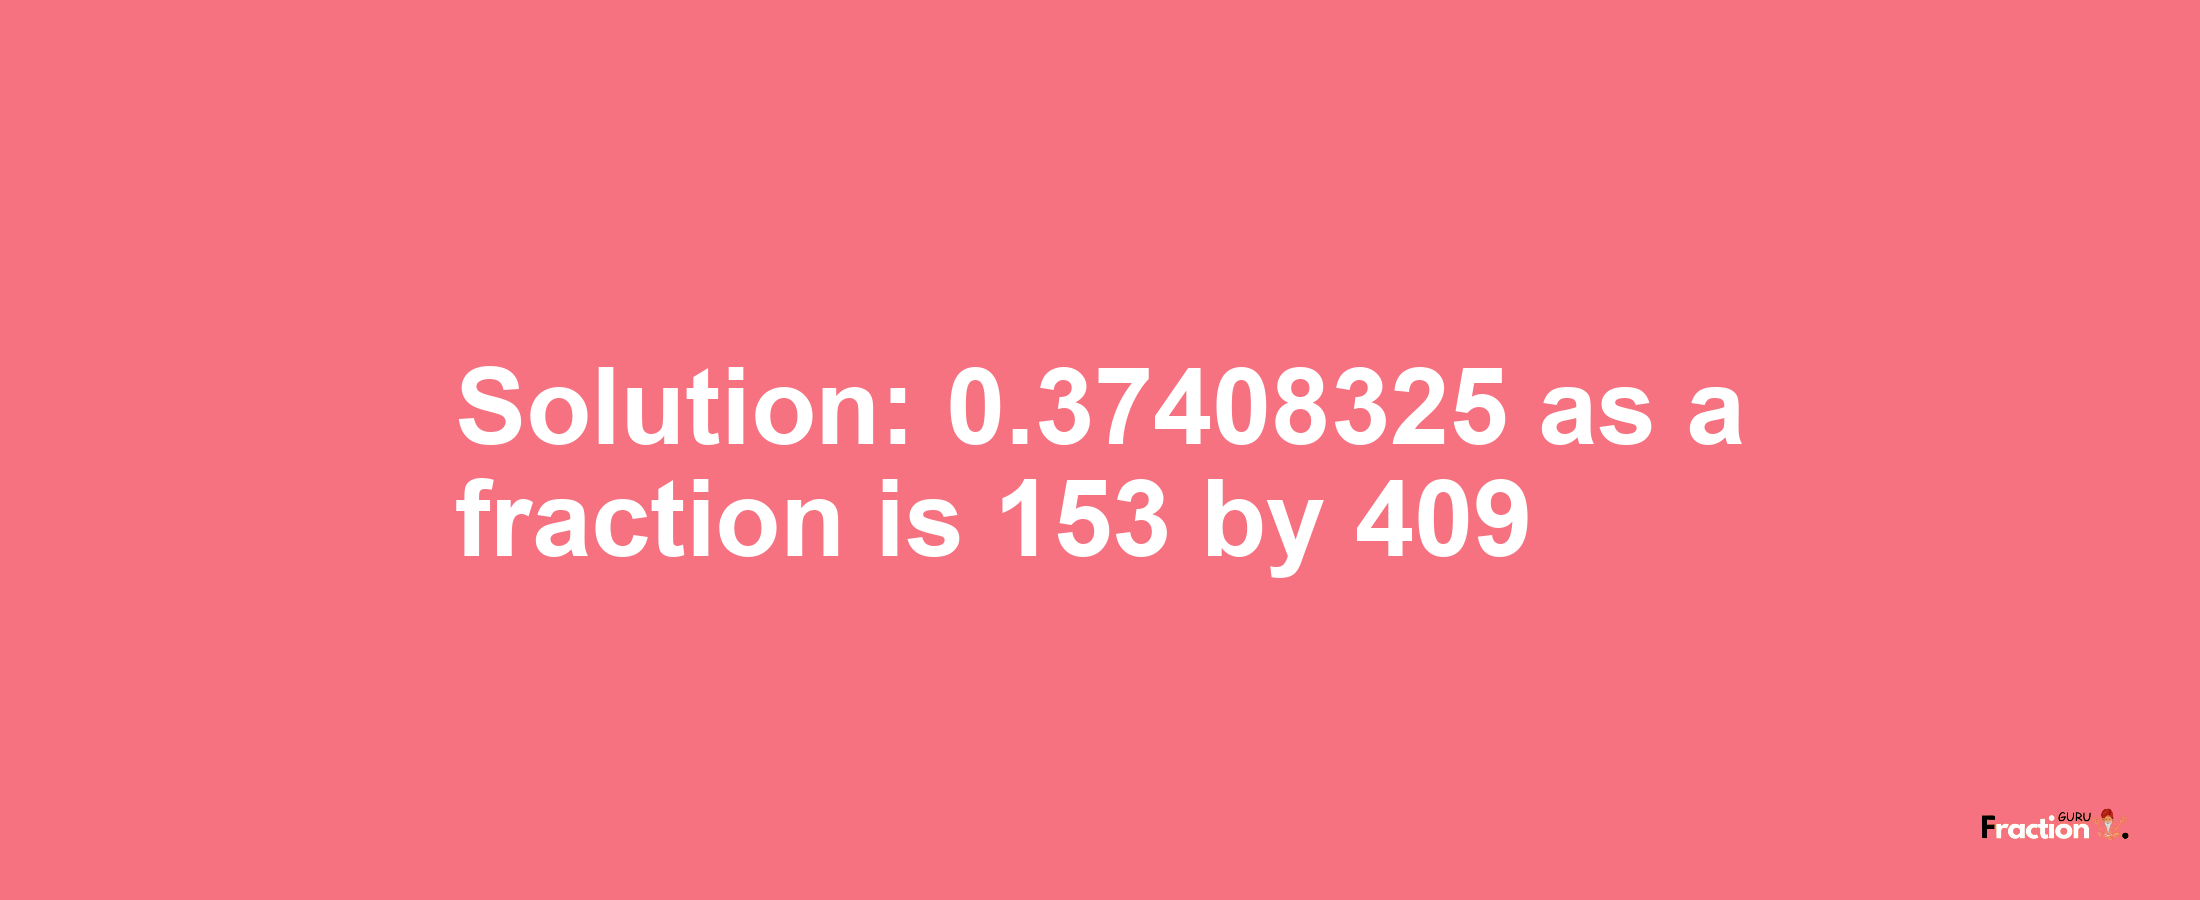 Solution:0.37408325 as a fraction is 153/409